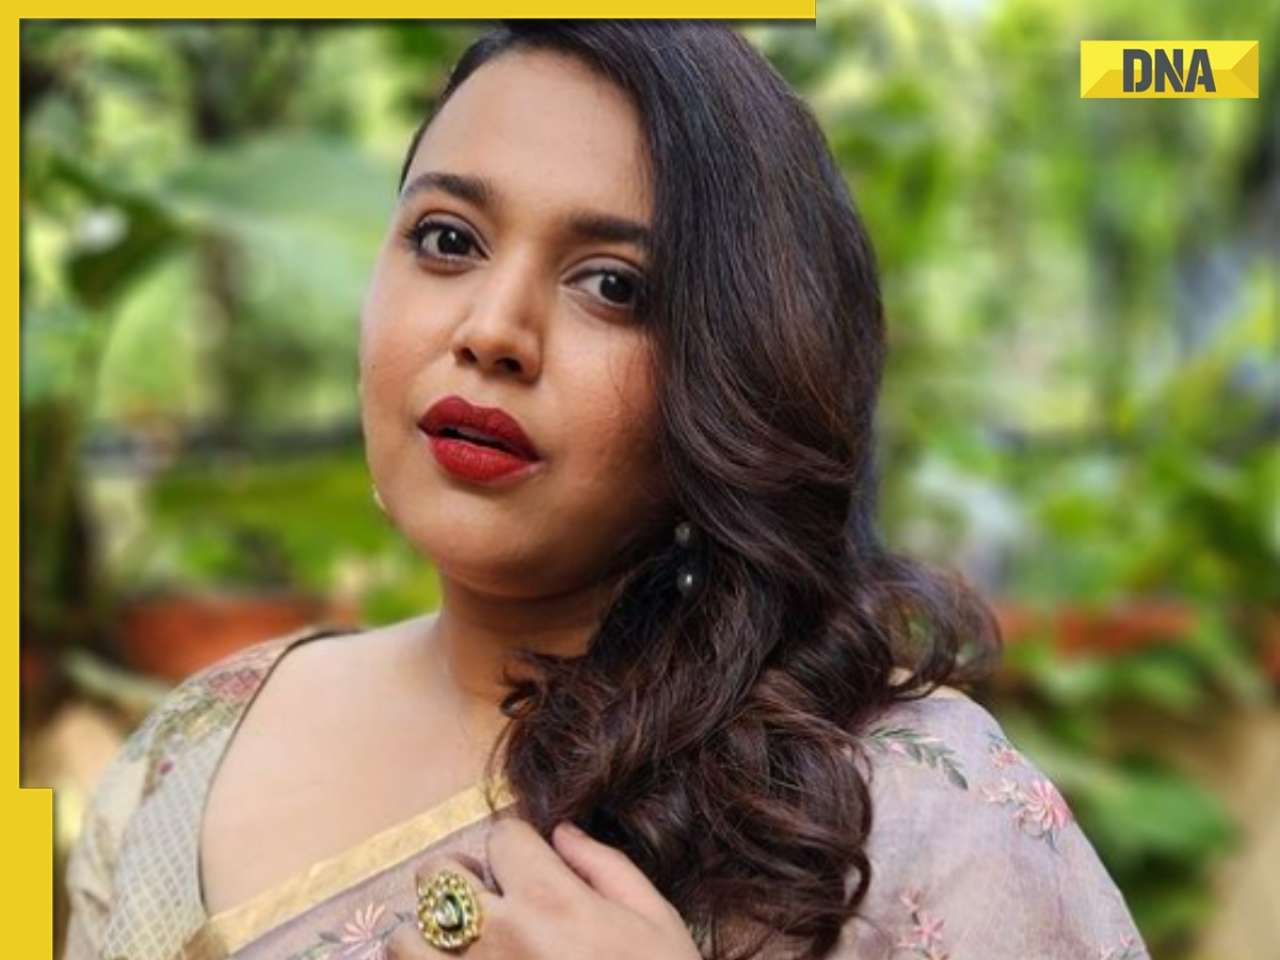 Swara Bhasker slams news portal claiming she's losing work due to weight: 'Explain physiology of childbirth to geniuses'